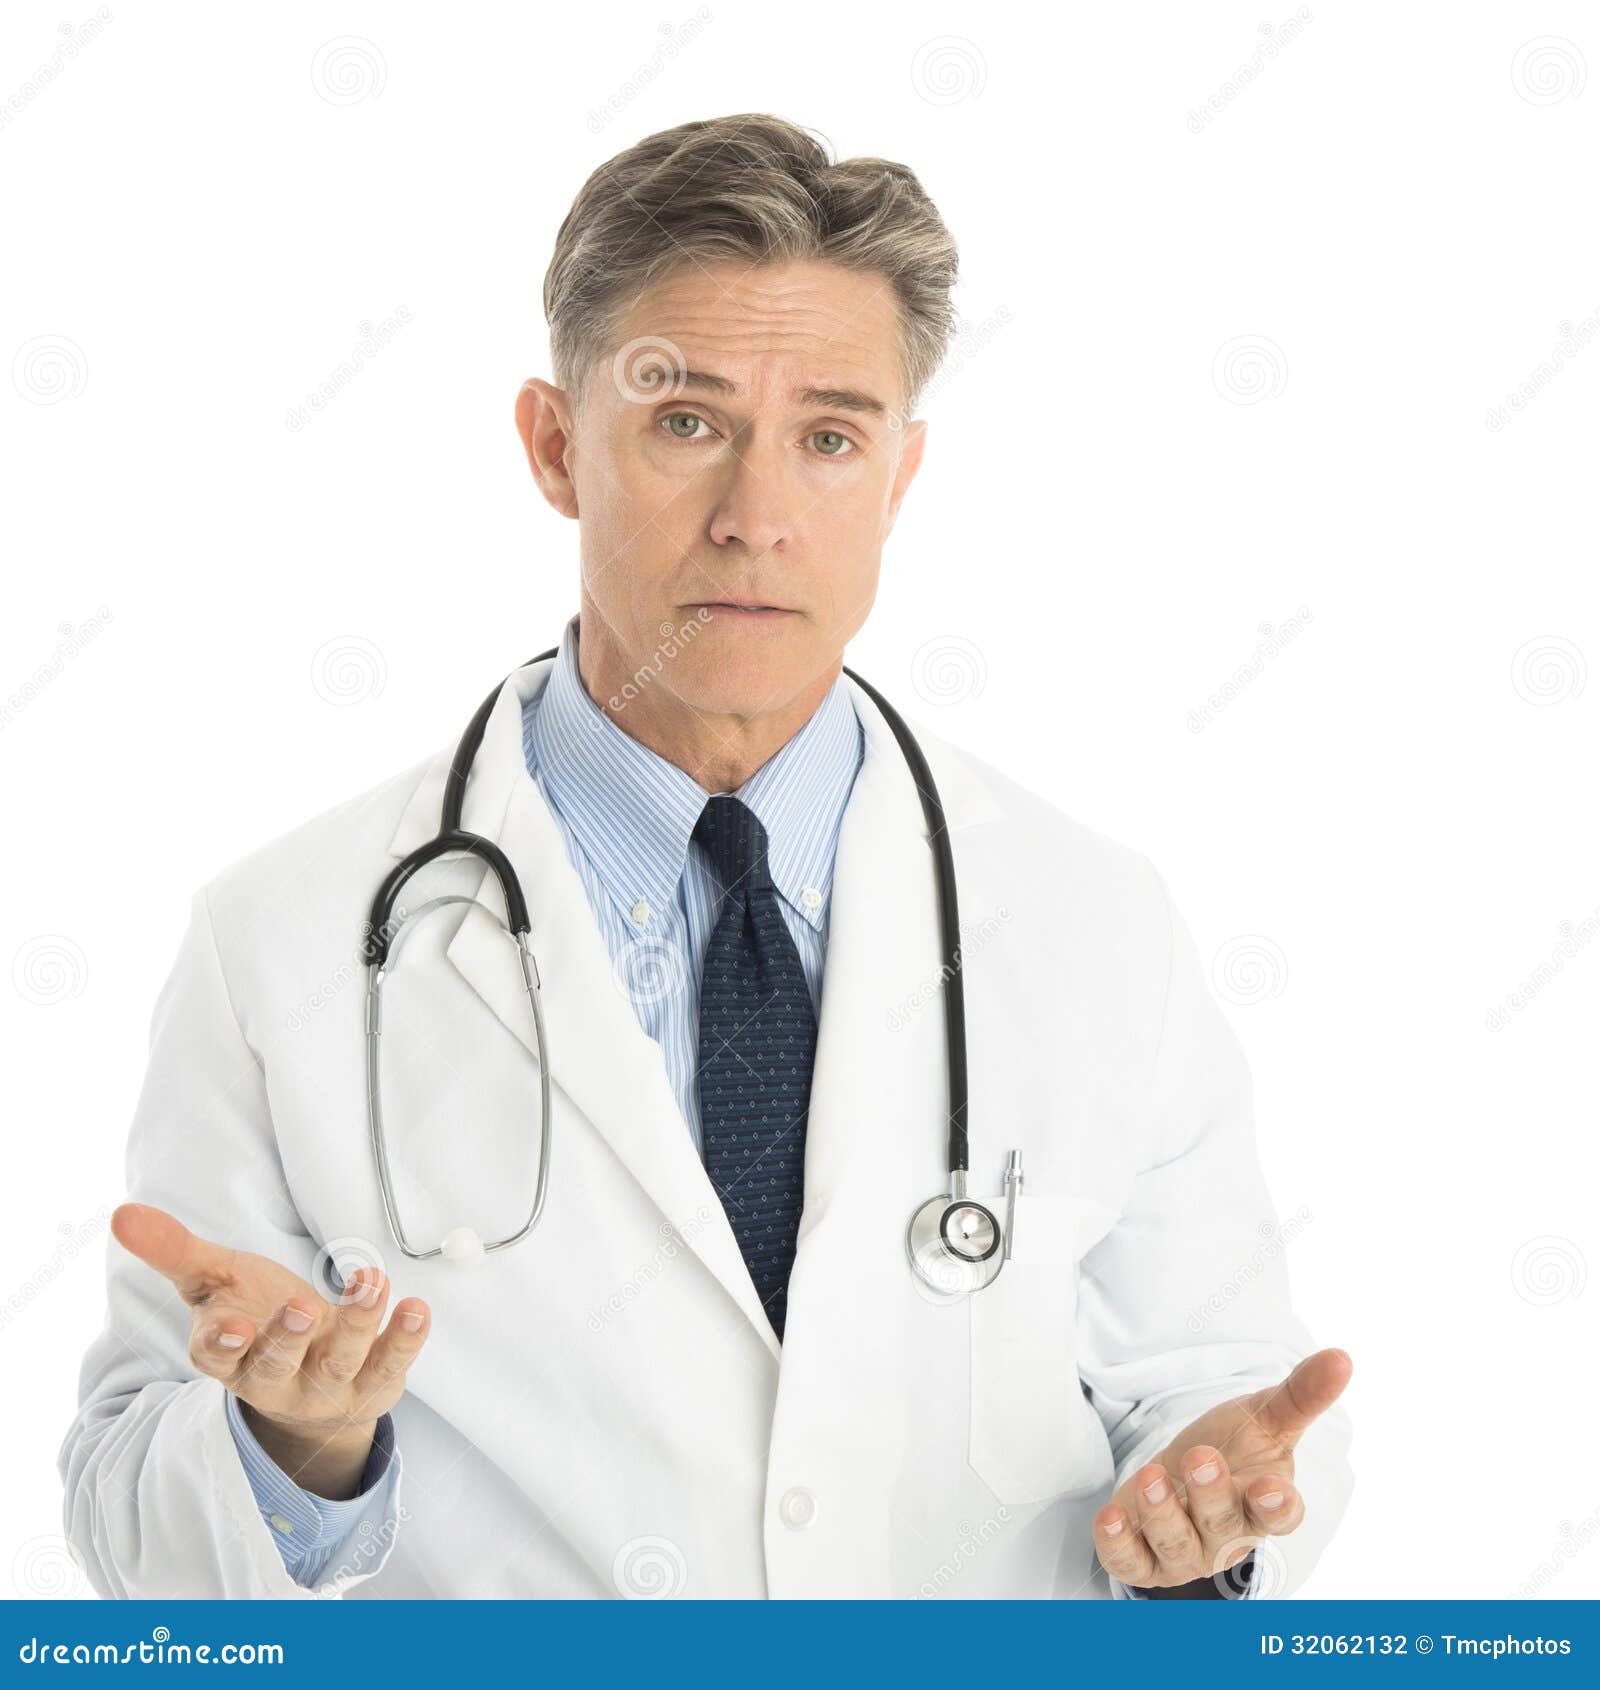 serious male doctor gesturing against white background